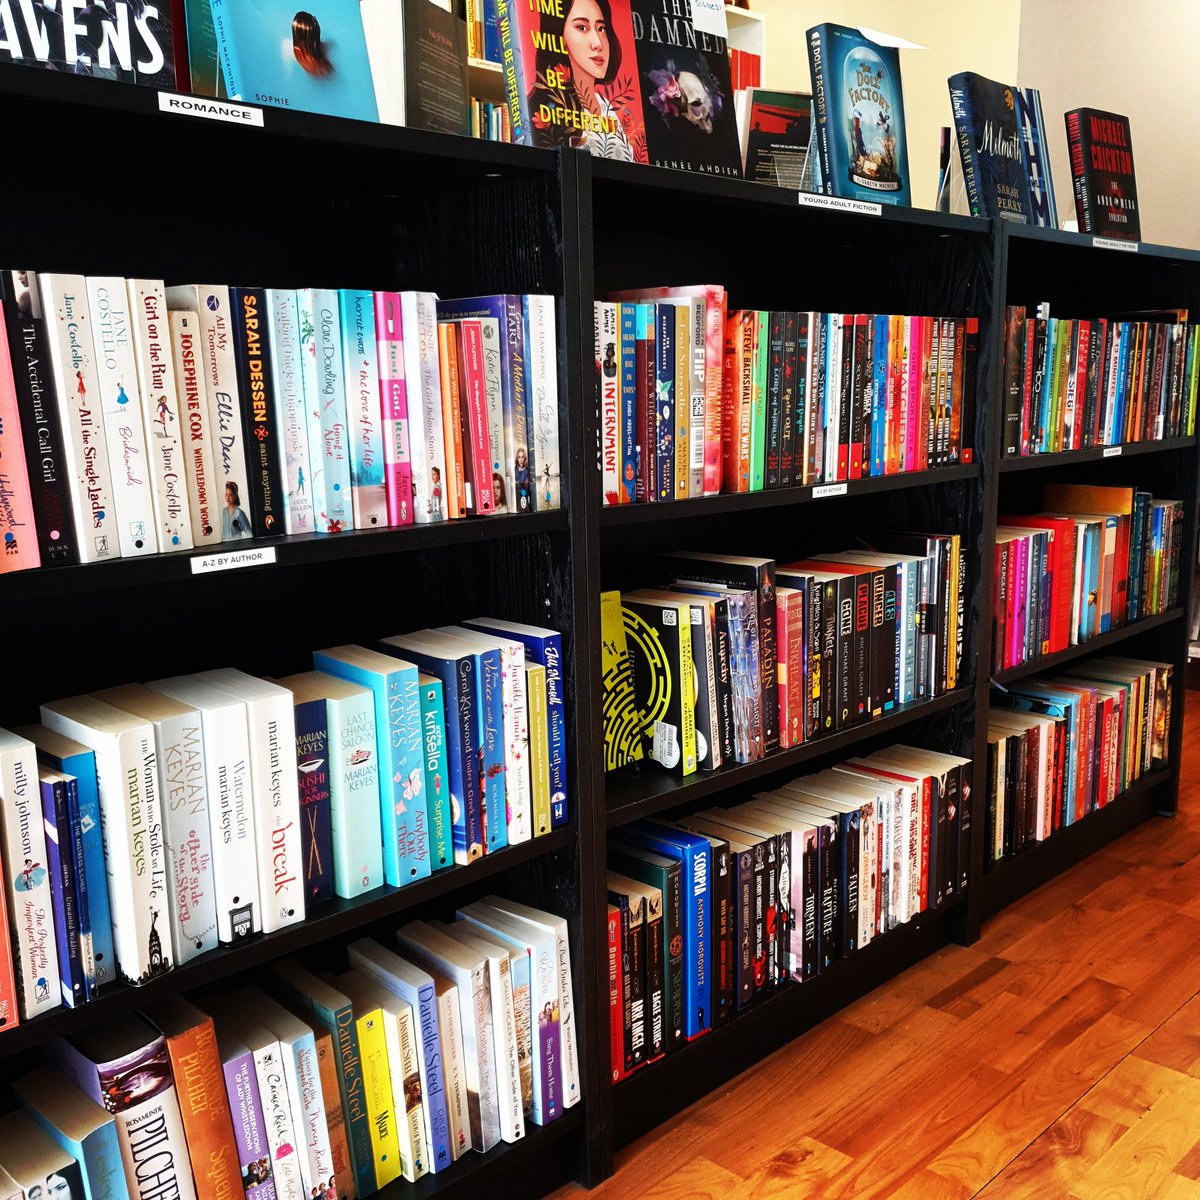 The shop is expanding! 🥳 Well, we've got two new shelves and rearranged a bit :) from now on you can find Young Adult fiction next to our Romance section in the fiction room. What do you think about the new layout?💕